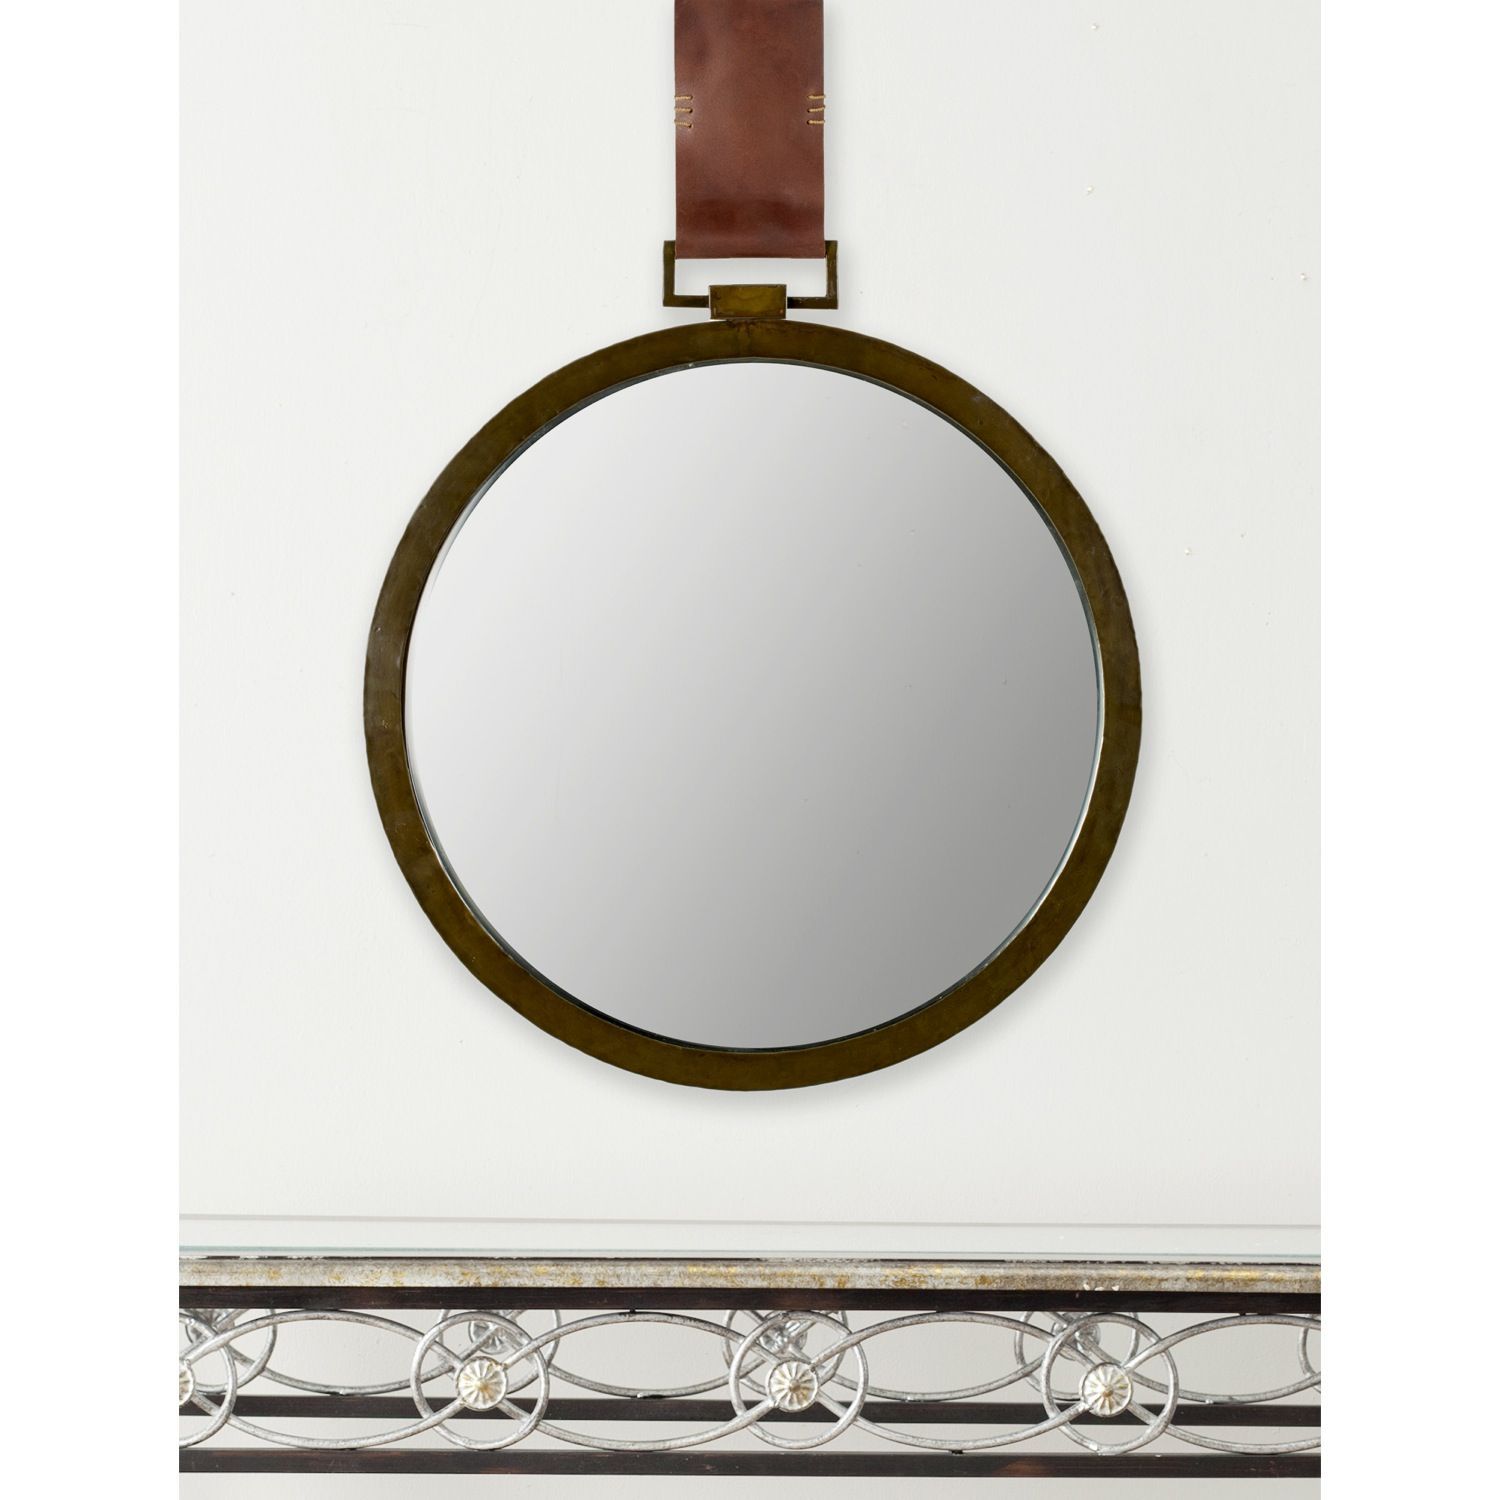 Mirrors | Mirrors With Leather Straps, Round Mirror Decor, Mirror Frames Within Brown Leather Round Wall Mirrors (View 5 of 15)